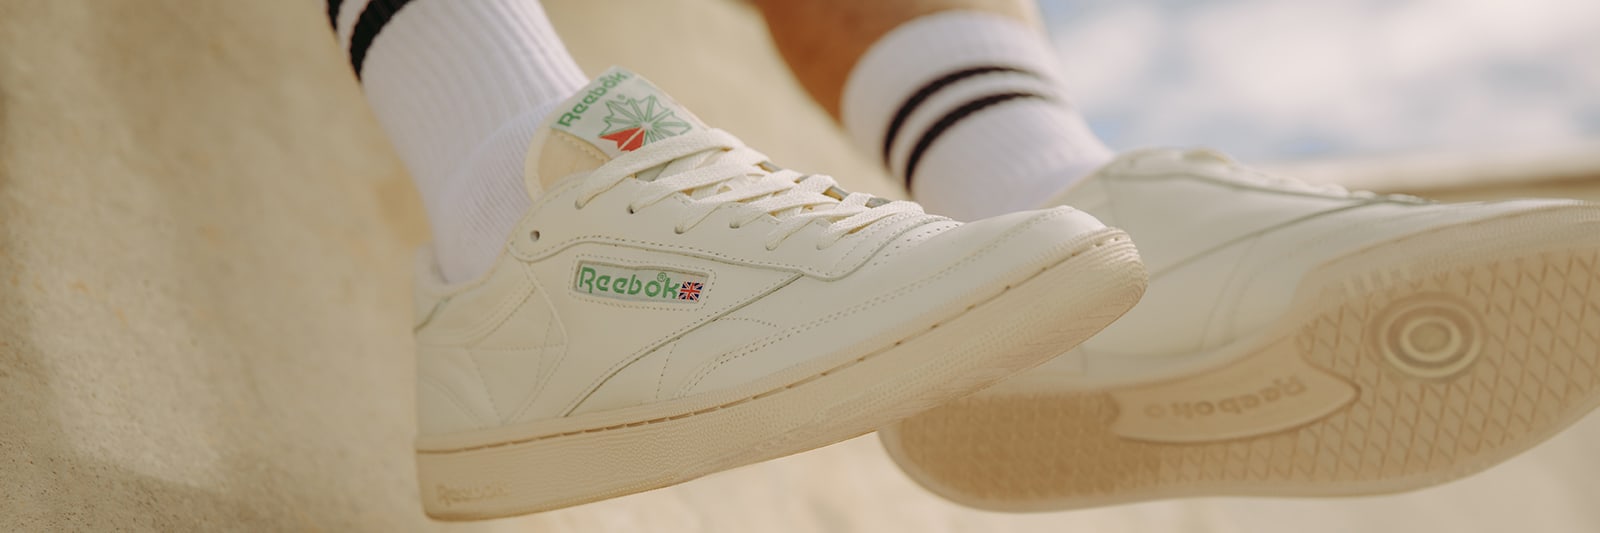 how to wash reebok sports shoes